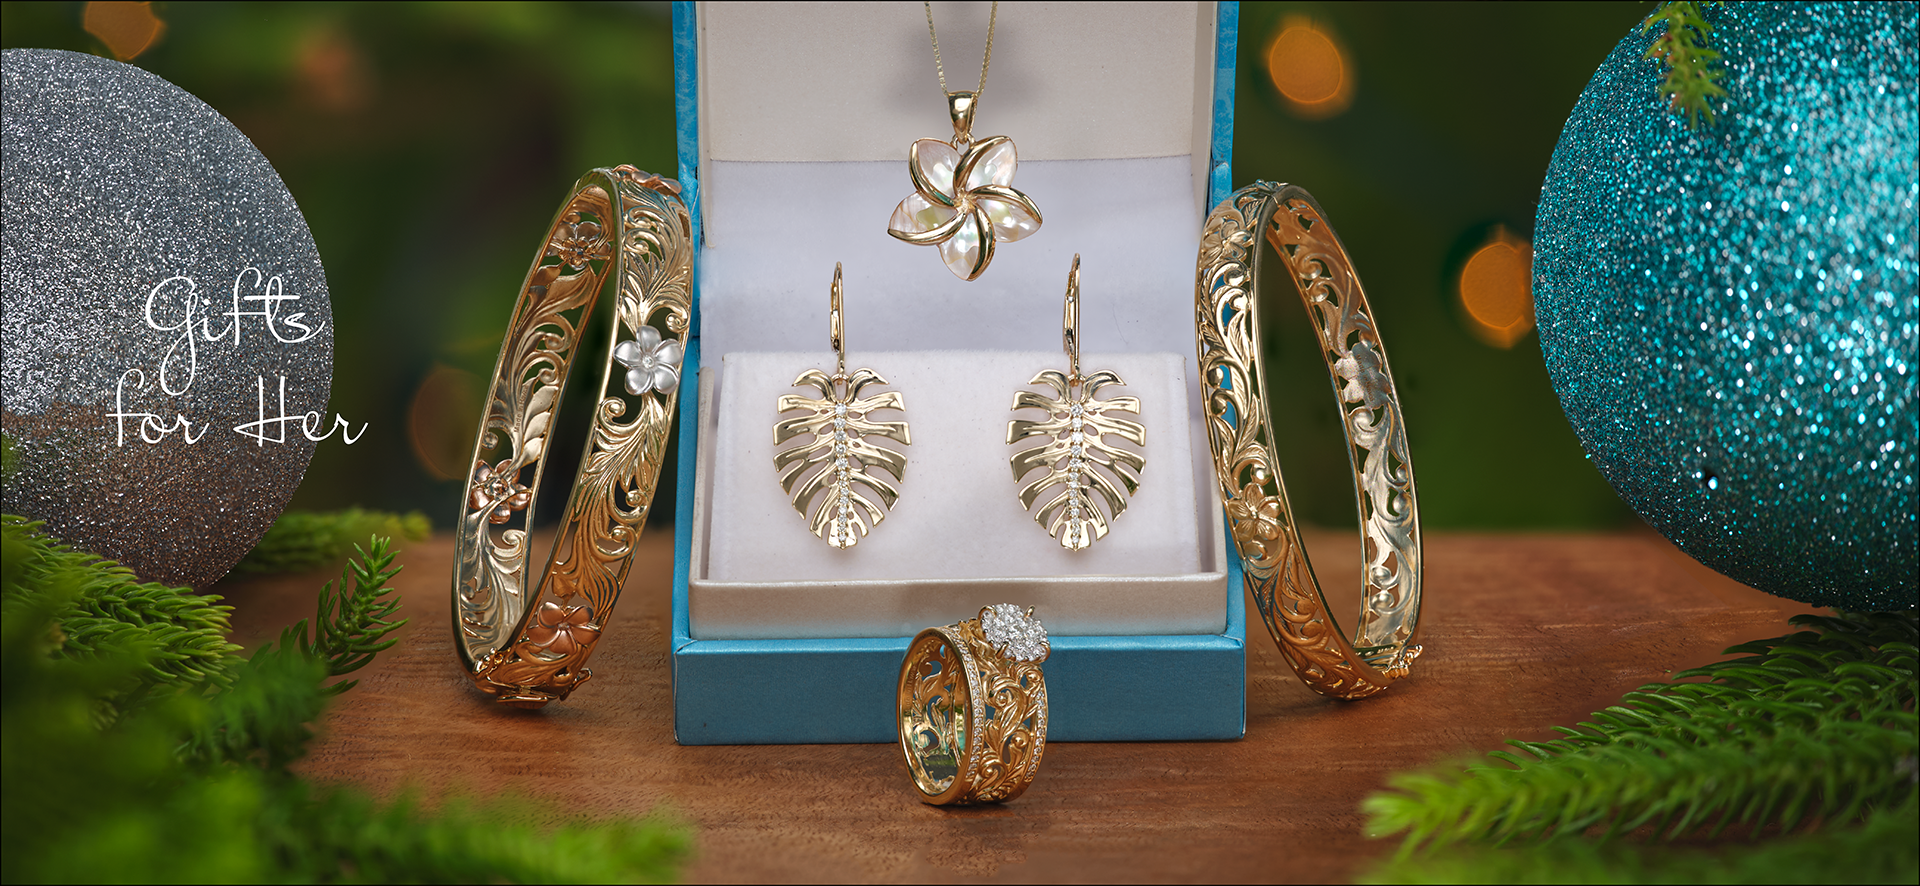 Shop Holiday Gifts for Her - Hawaiian Jewelry